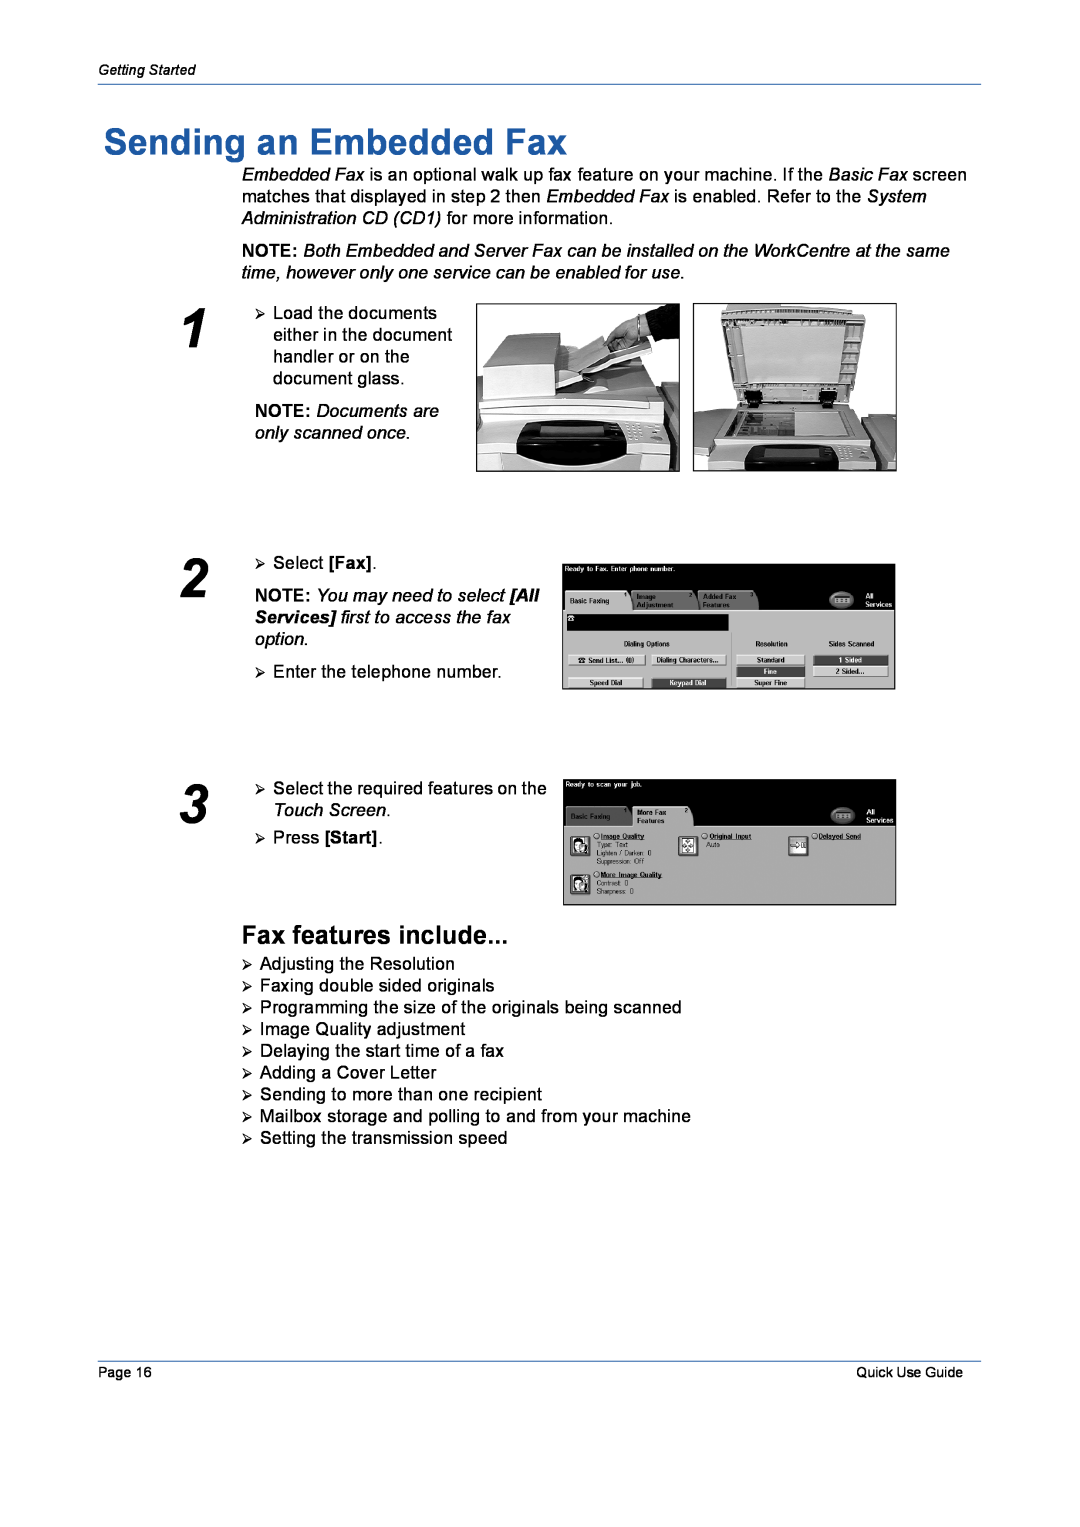 Xerox 5632 manual Sending an Embedded Fax, Fax features include 